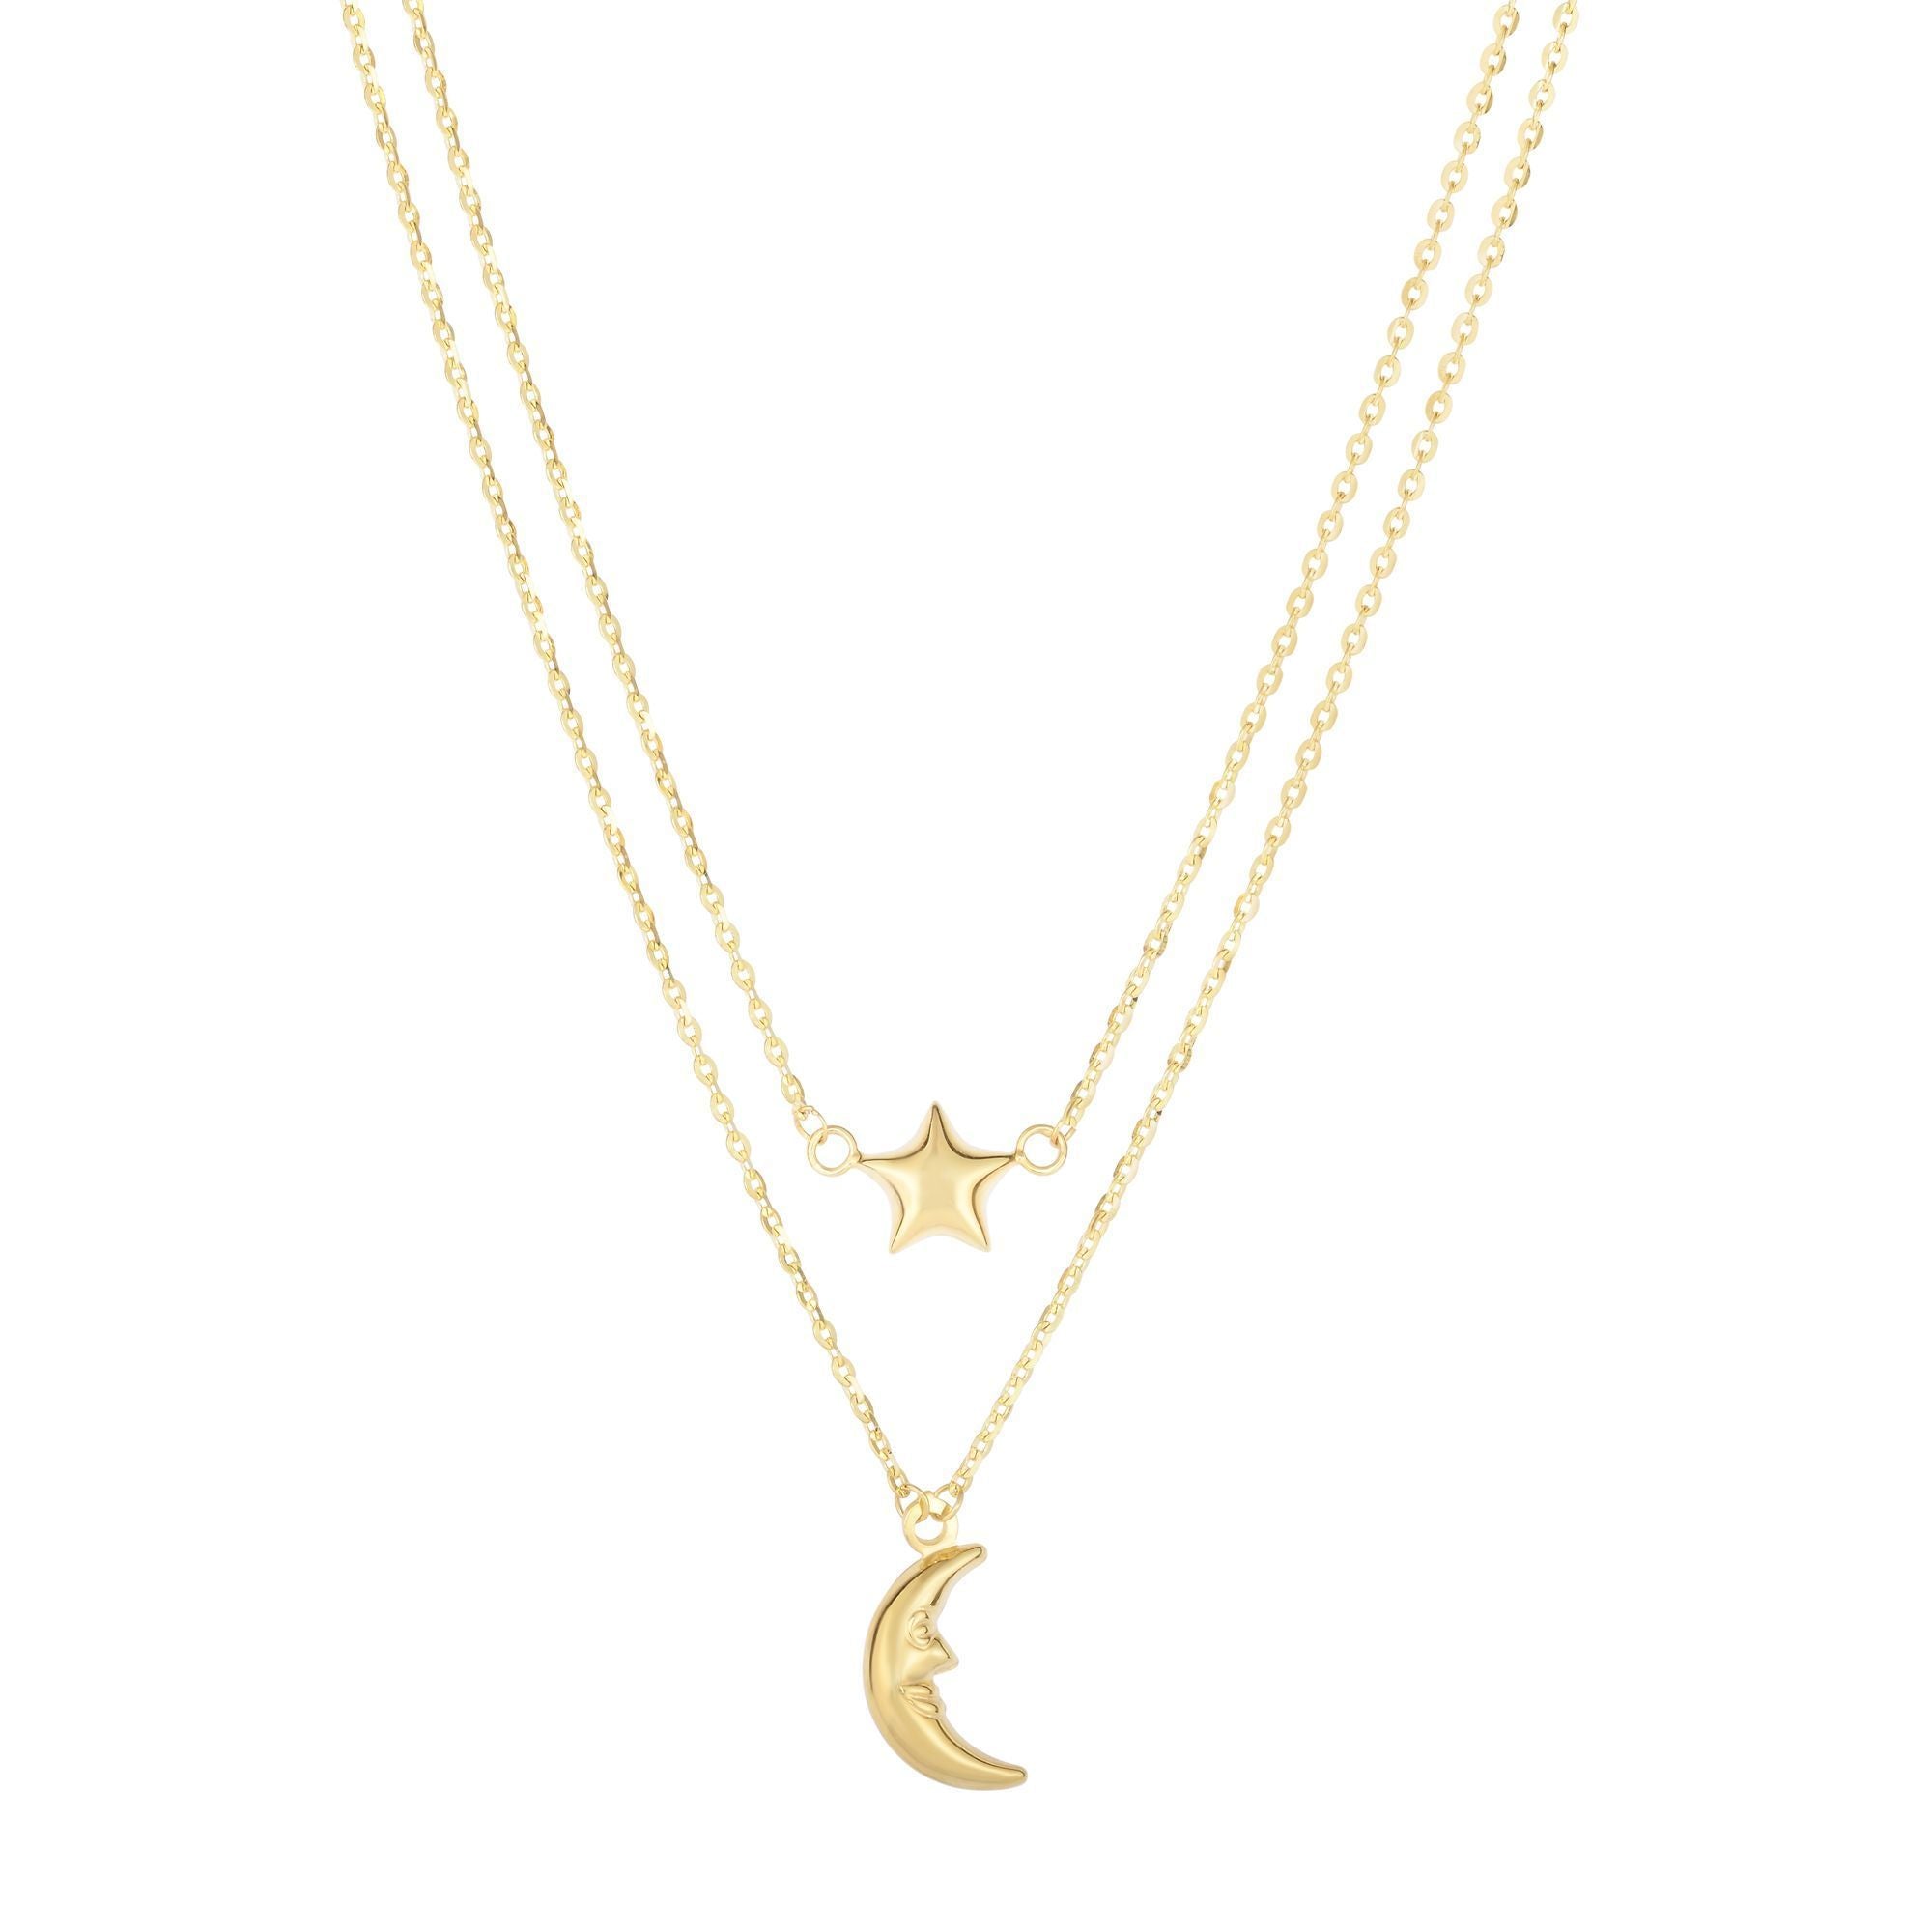 Solid Gold Puff Star and Crescent Moon Layered Necklace - wingroupjewelry